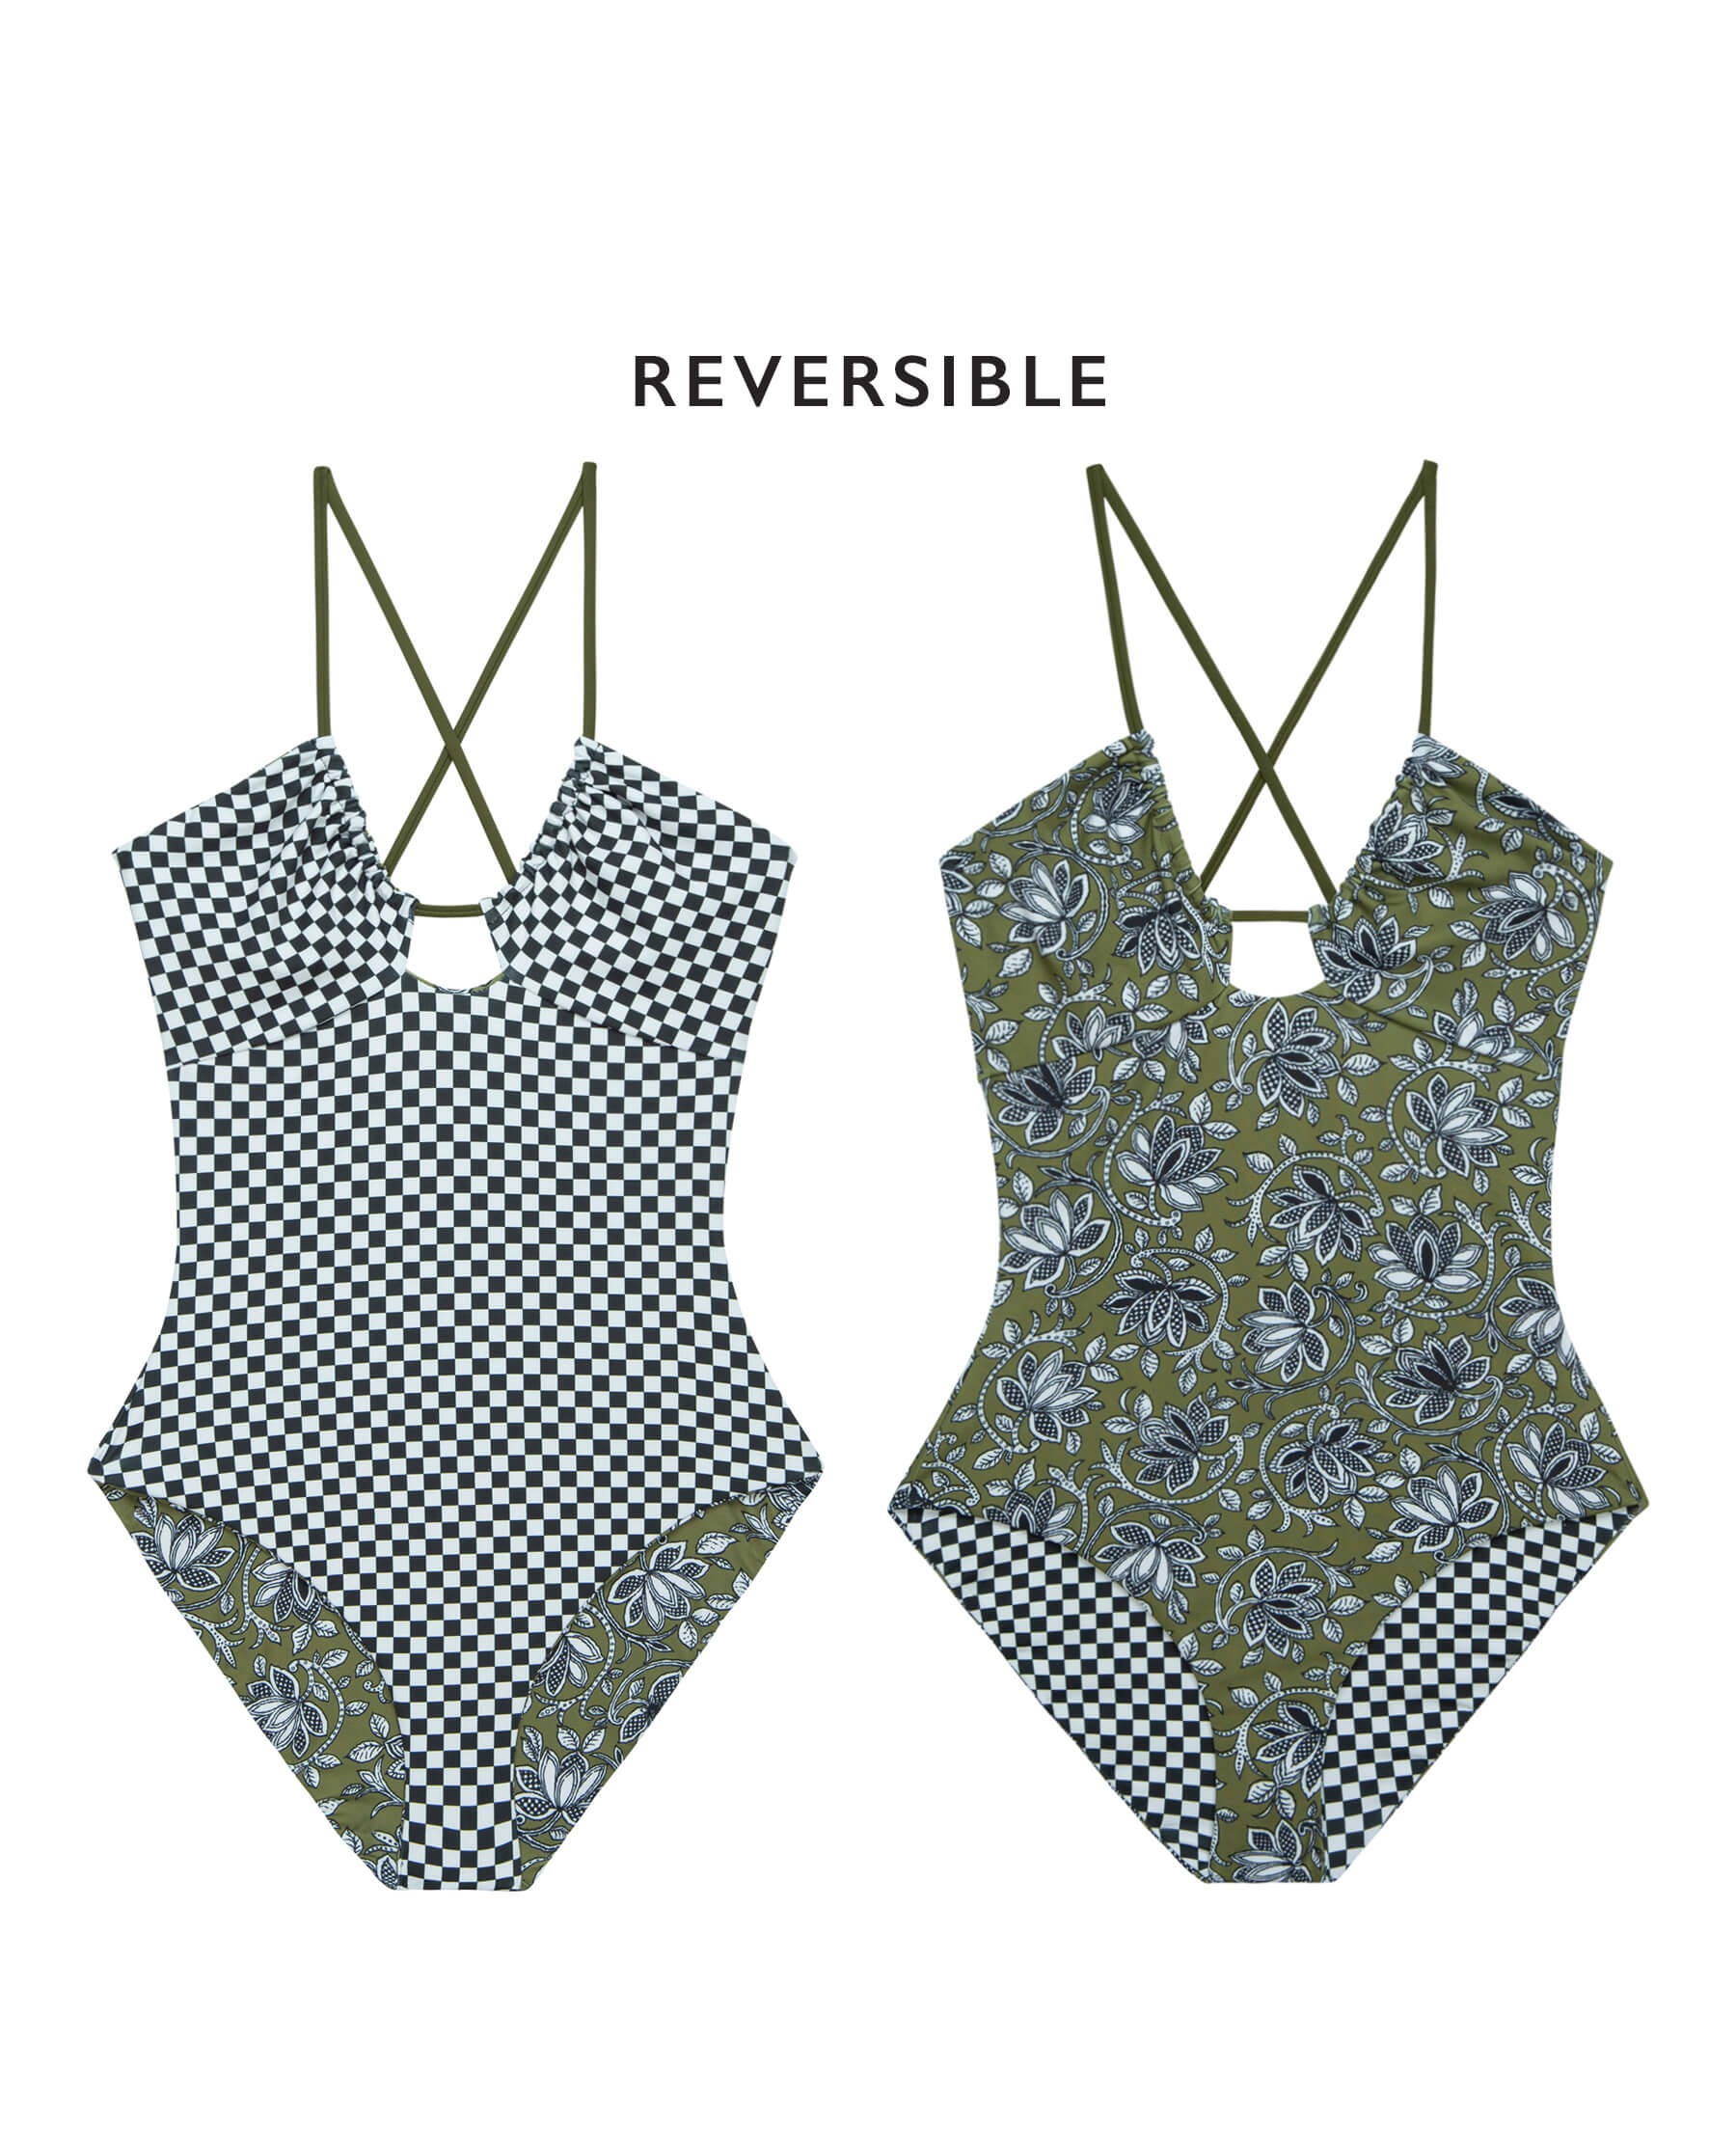 The Reversible Keyhole One Piece